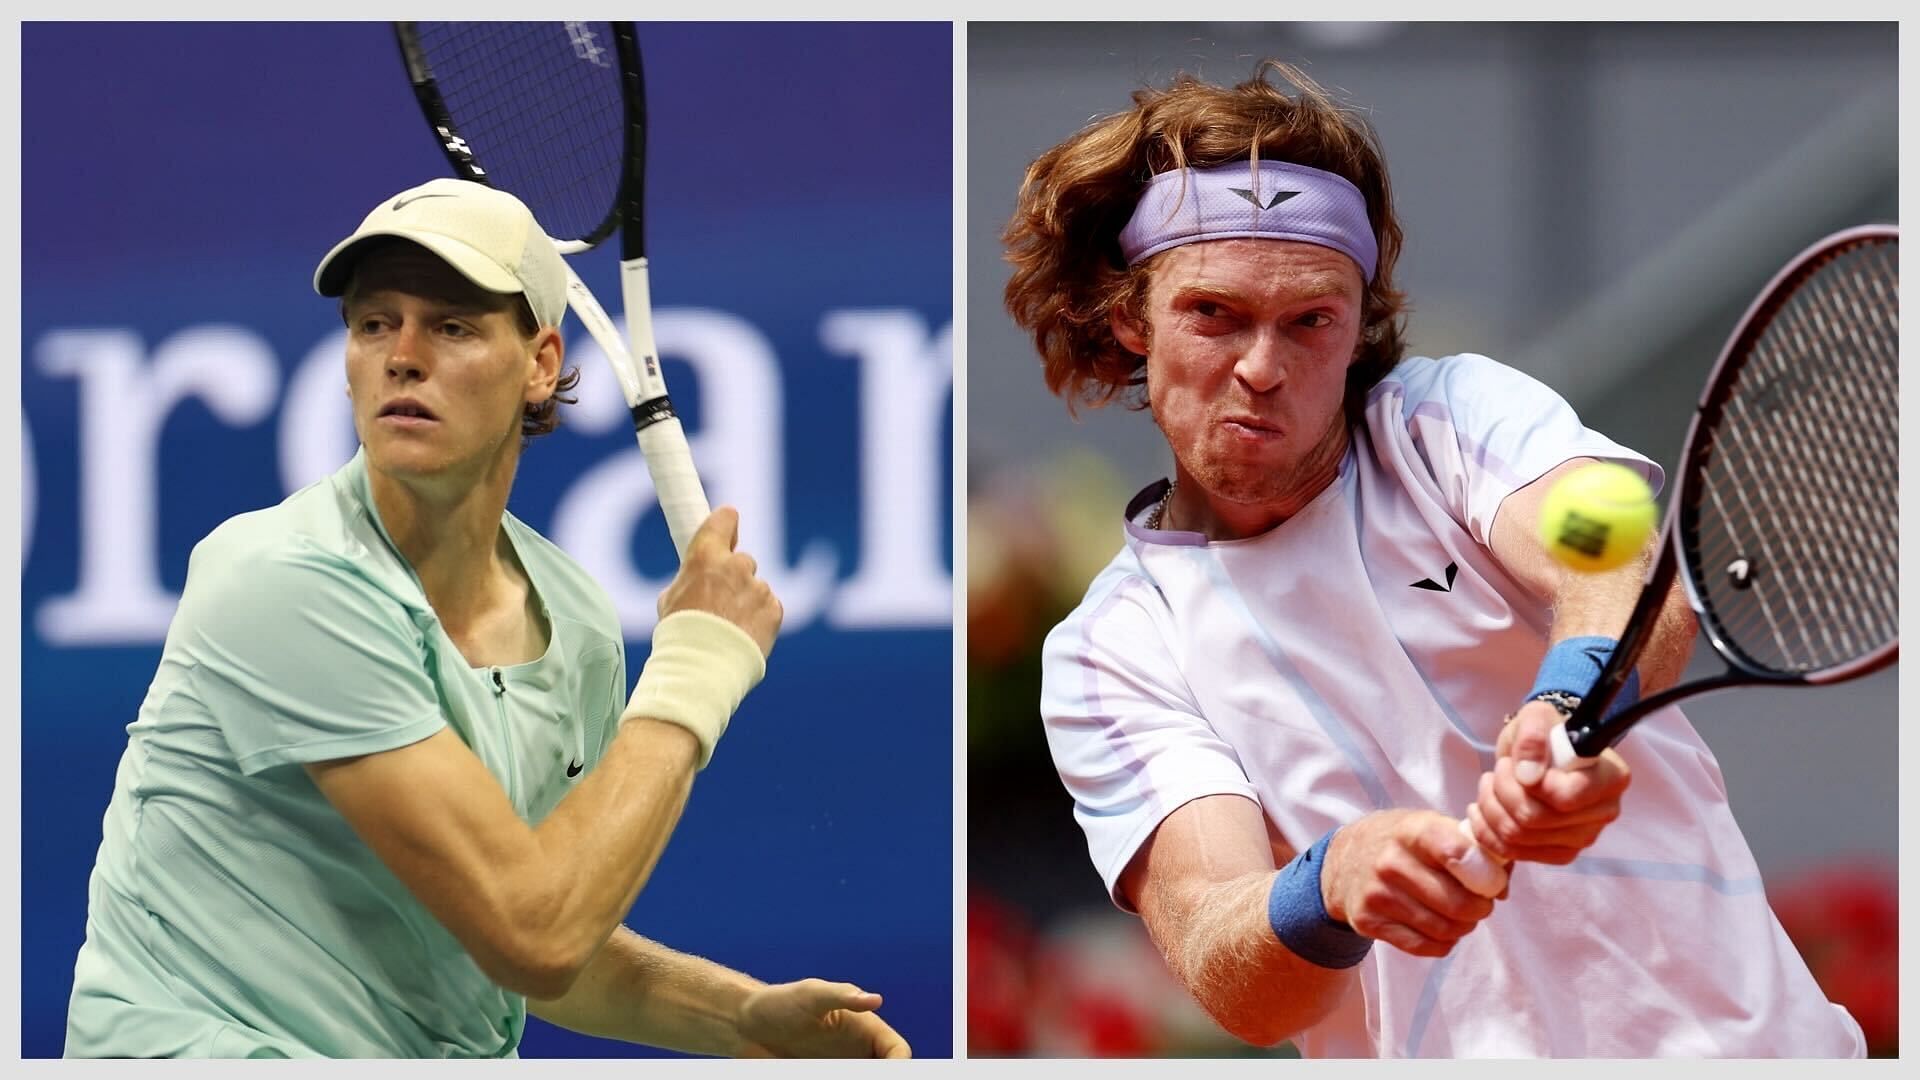 Jannik Sinner vs Andrey Rublev will be one of the semifinals at the Erste Bank Open